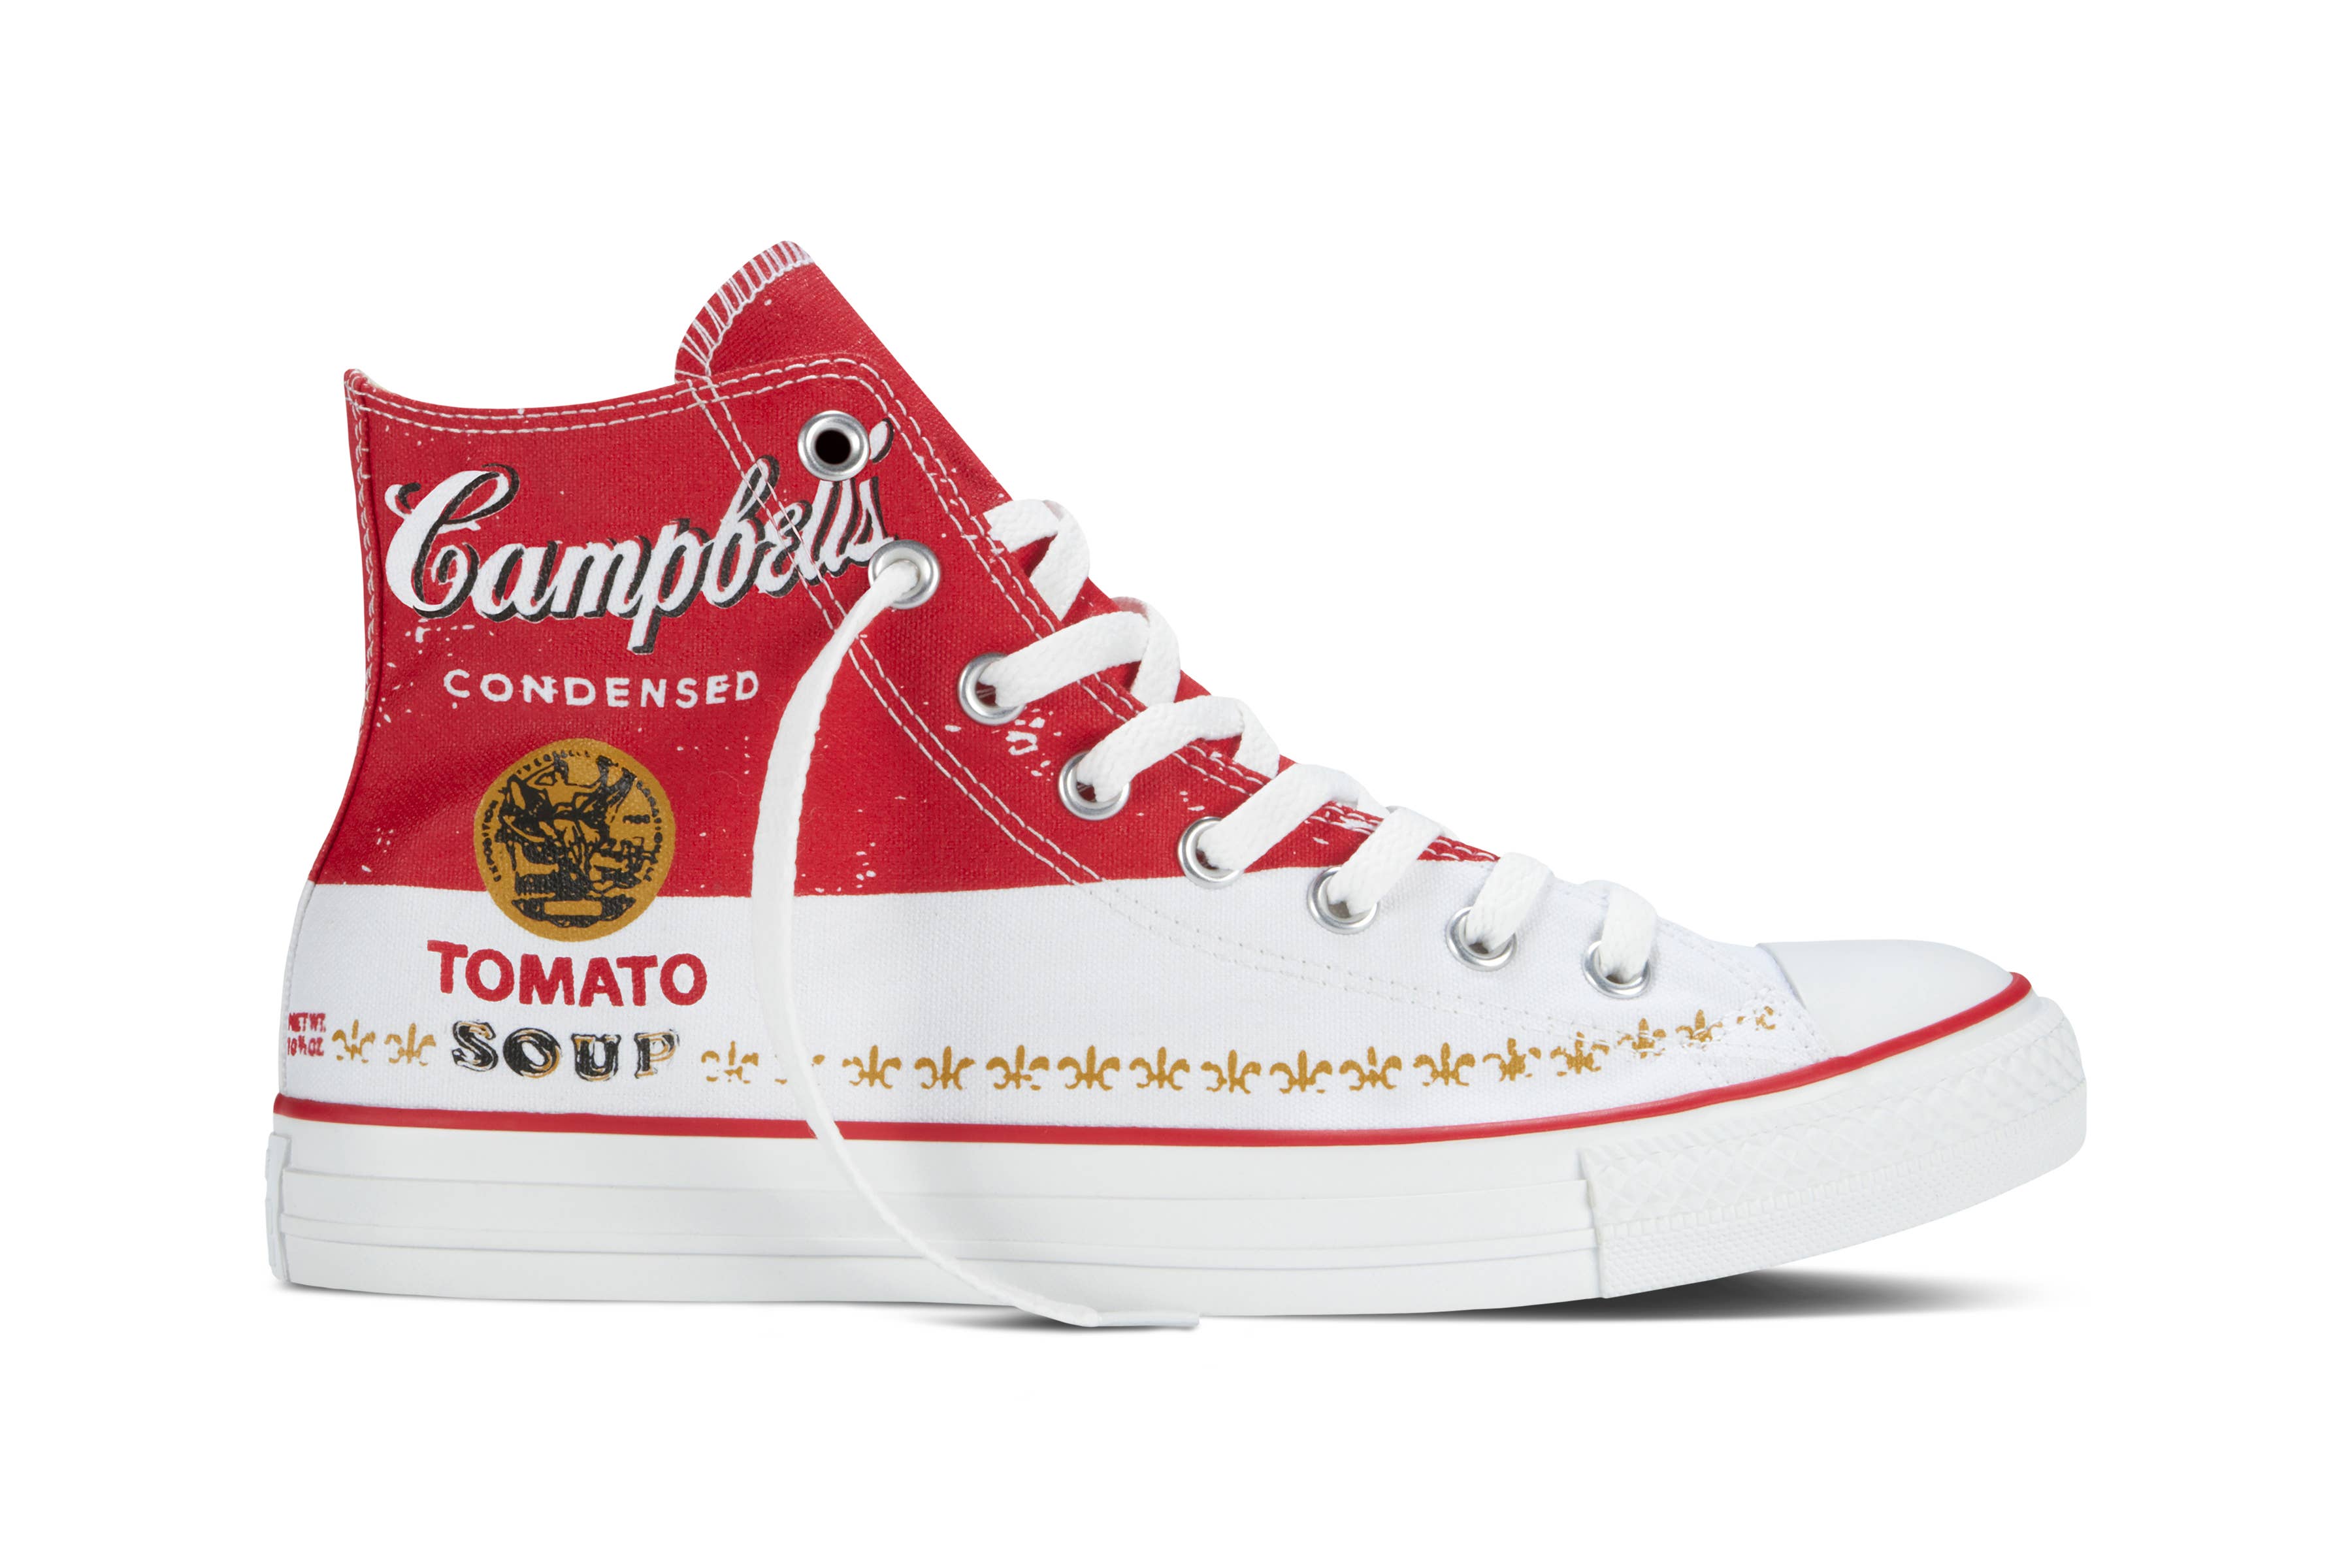 Converse Launching Andy Warhol x Converse Chuck Taylor All Star Collection